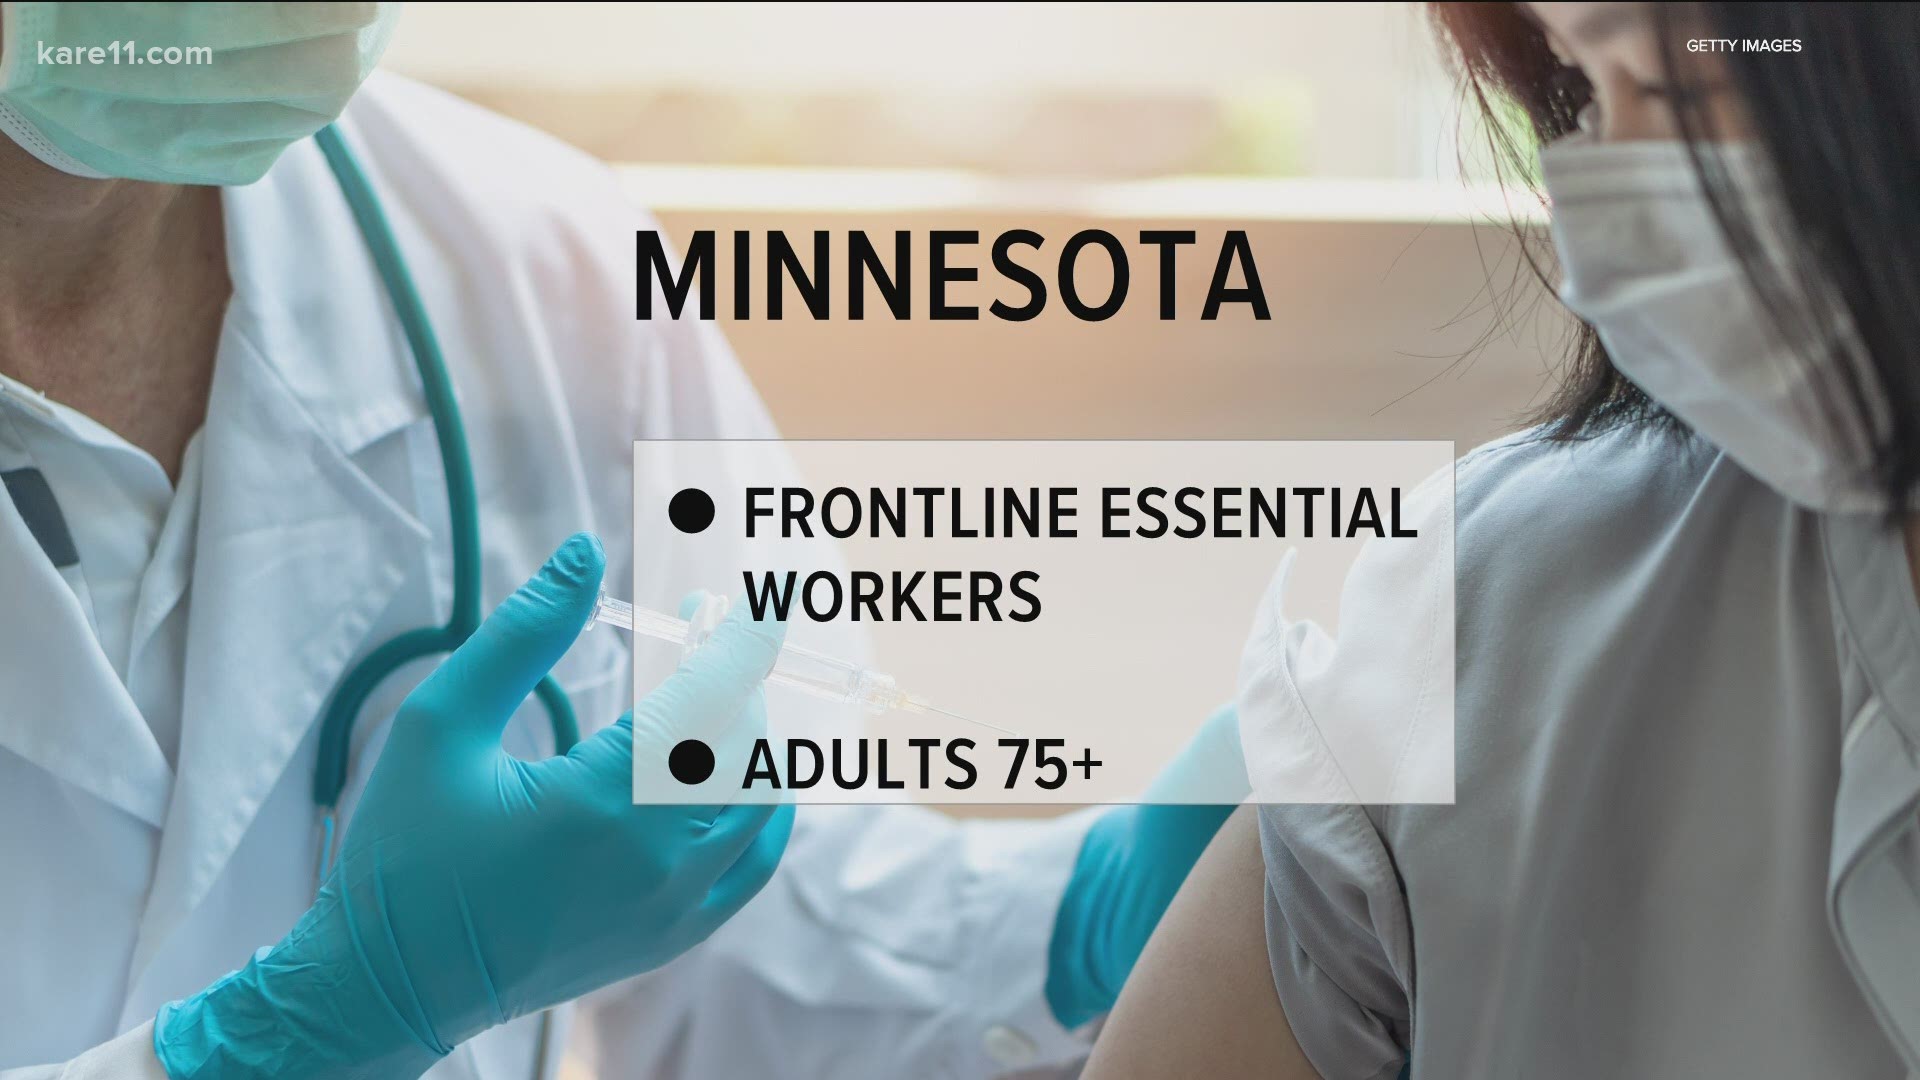 The new guidelines are meant to vaccinate more people but Minnesota health experts say the supply has not increased.